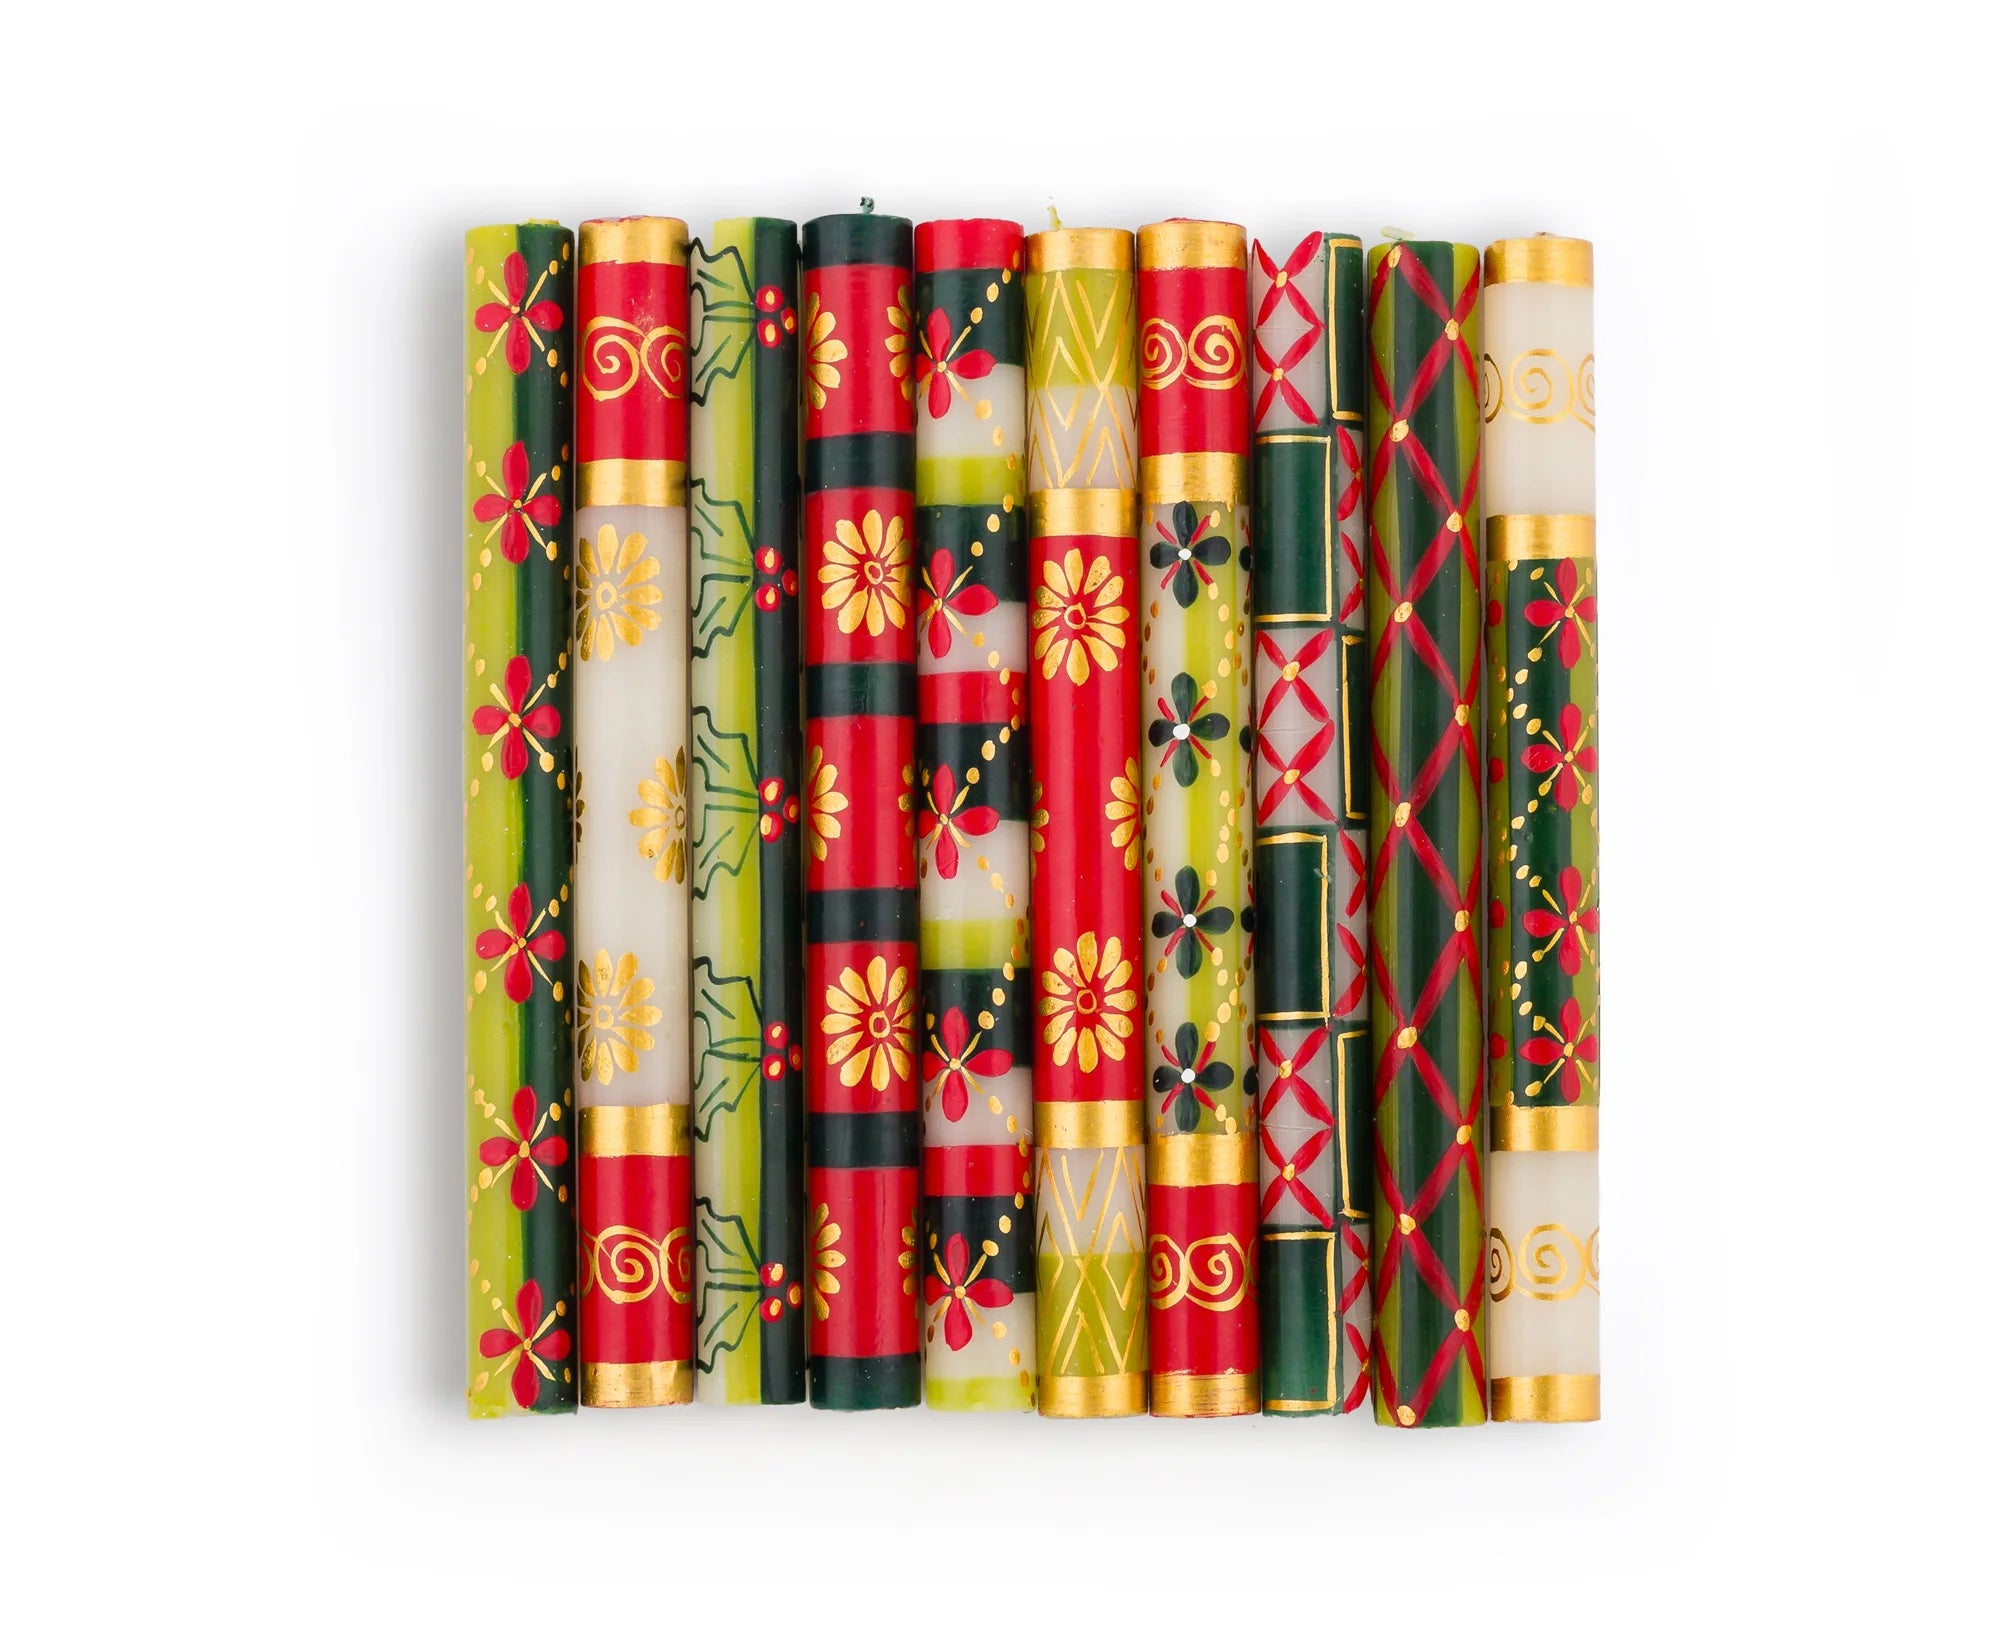 10 Christmas dinner tapers in the 10 designs of the Christmas collection. Hand painted in various traditional Christmas patterns in red, dark green, light green and gold on white tapers